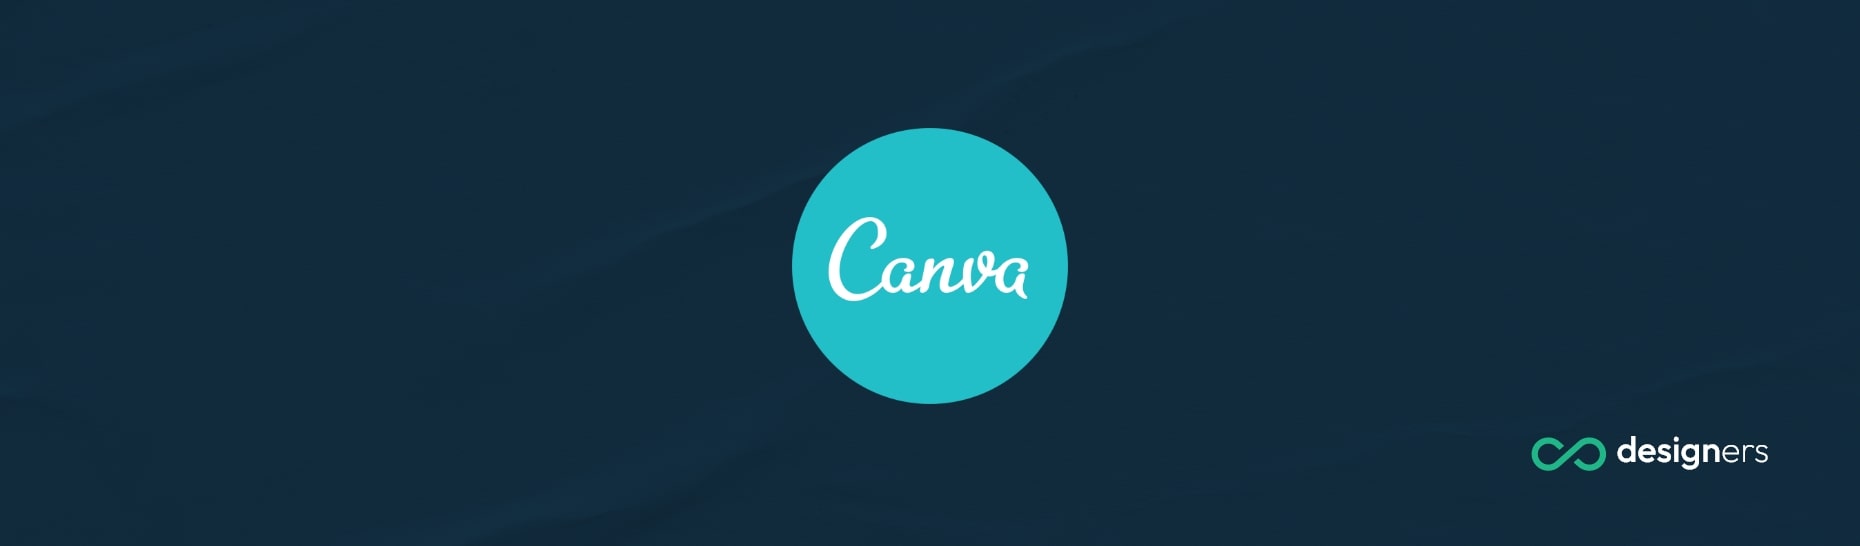 What Is the Typewriter Font Called on Canva?